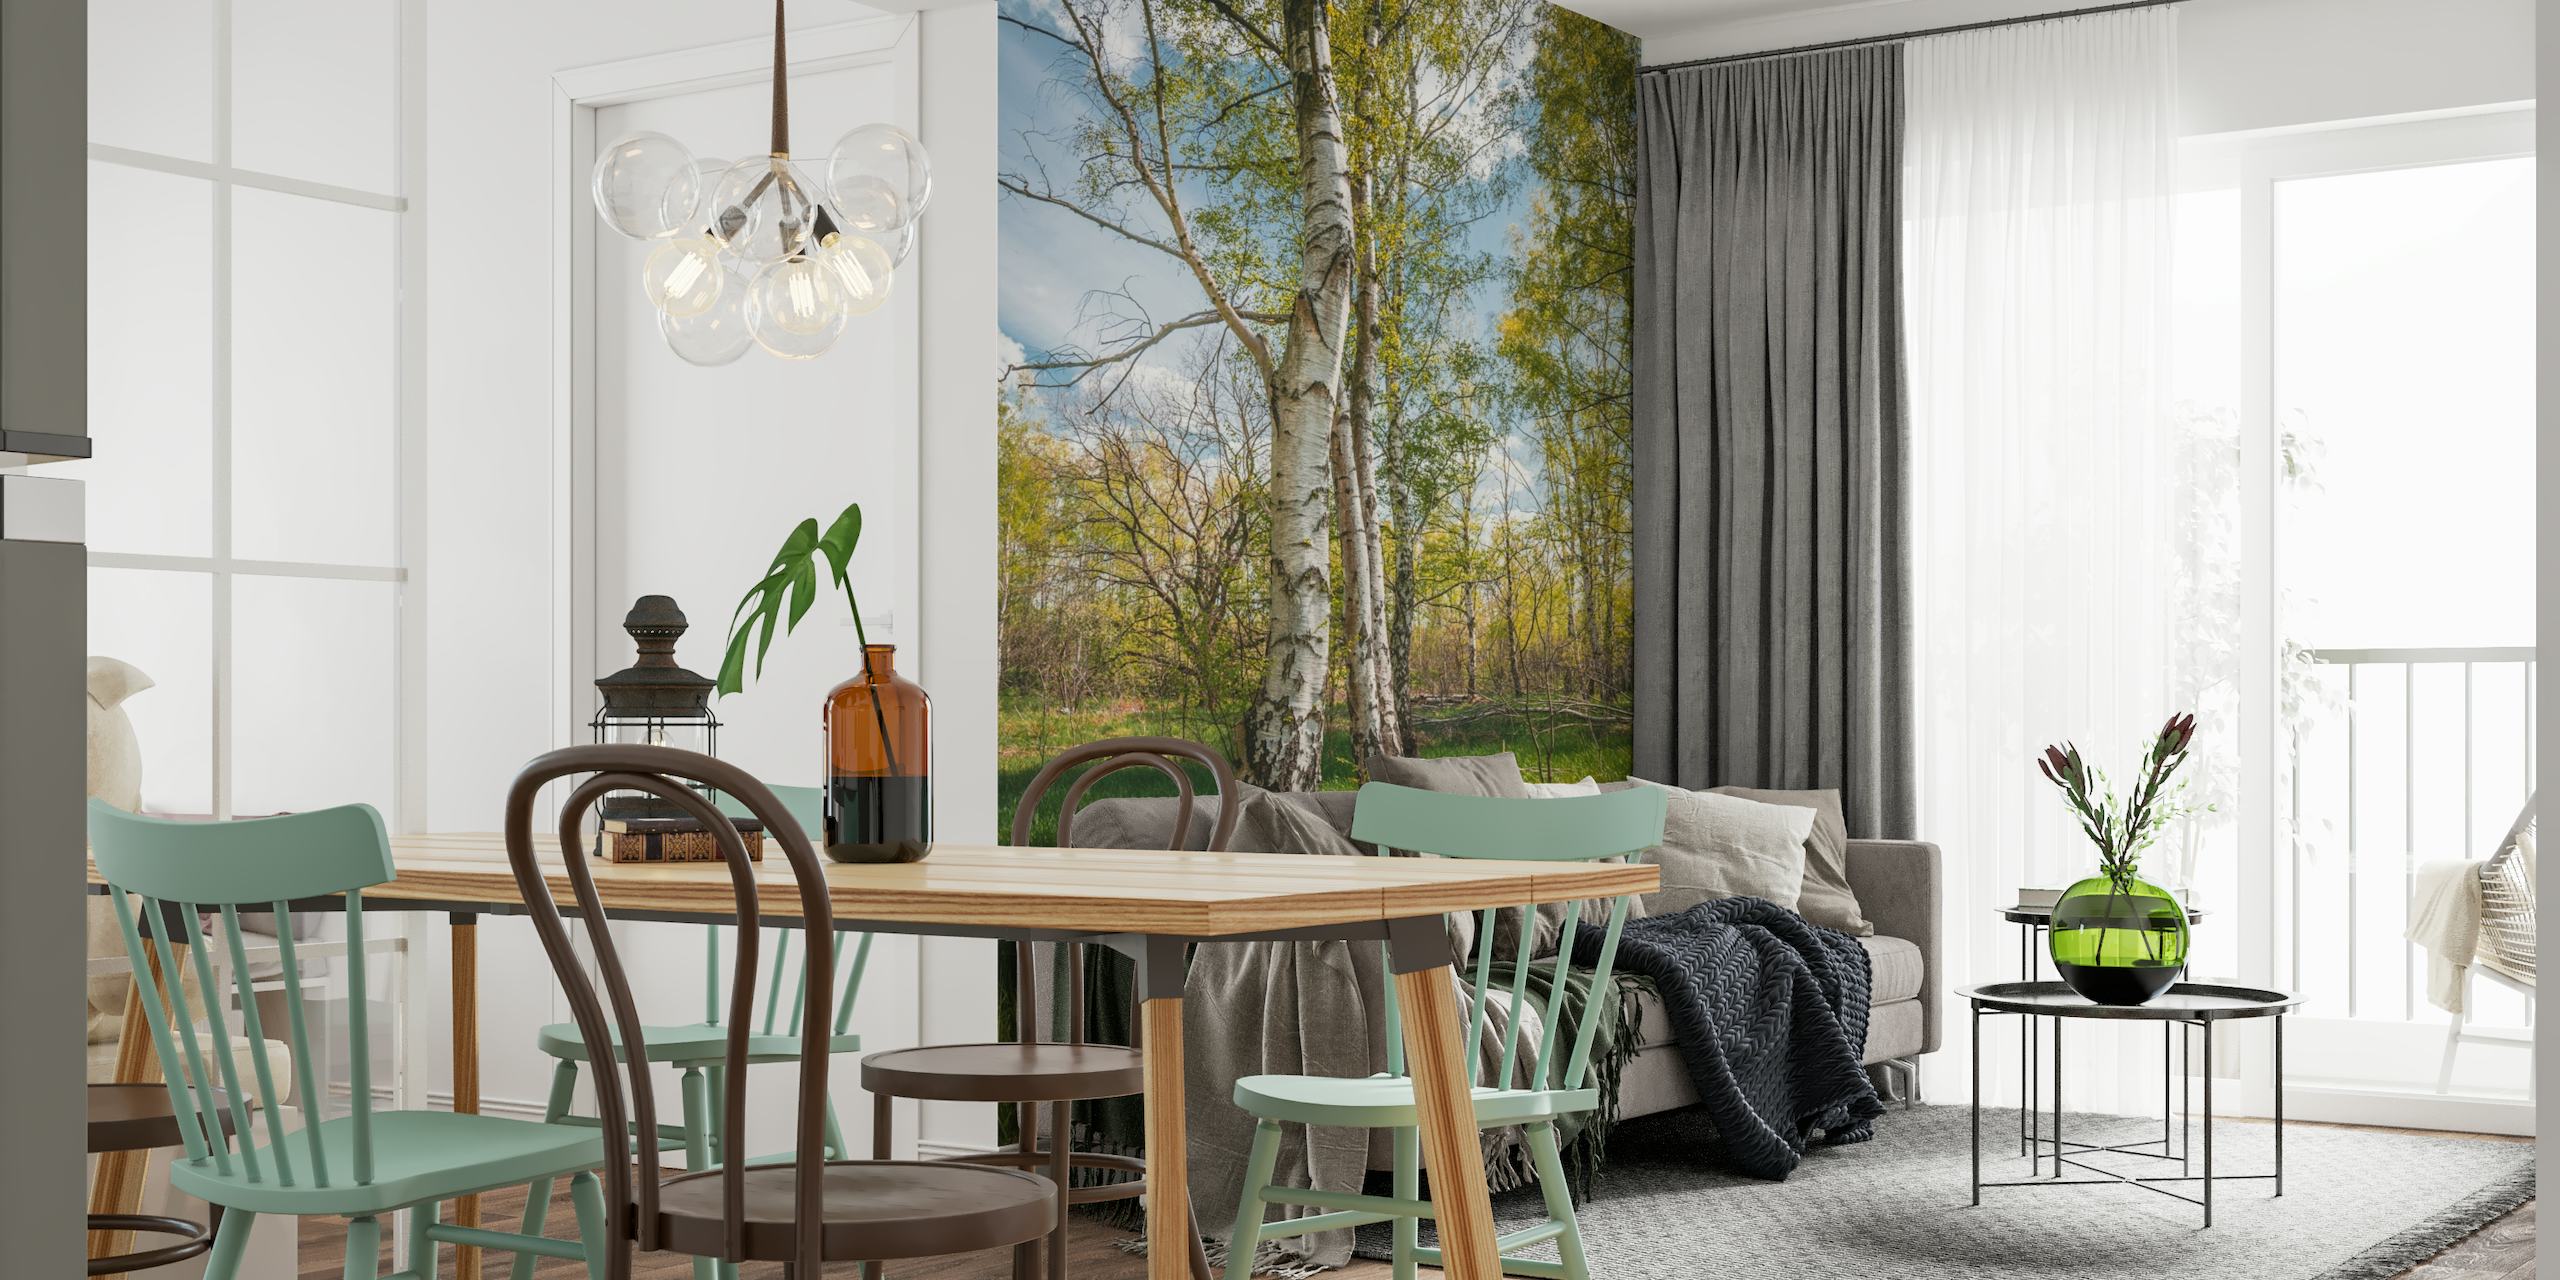 A tranquil spring day wall mural with birch trees and new green leaves